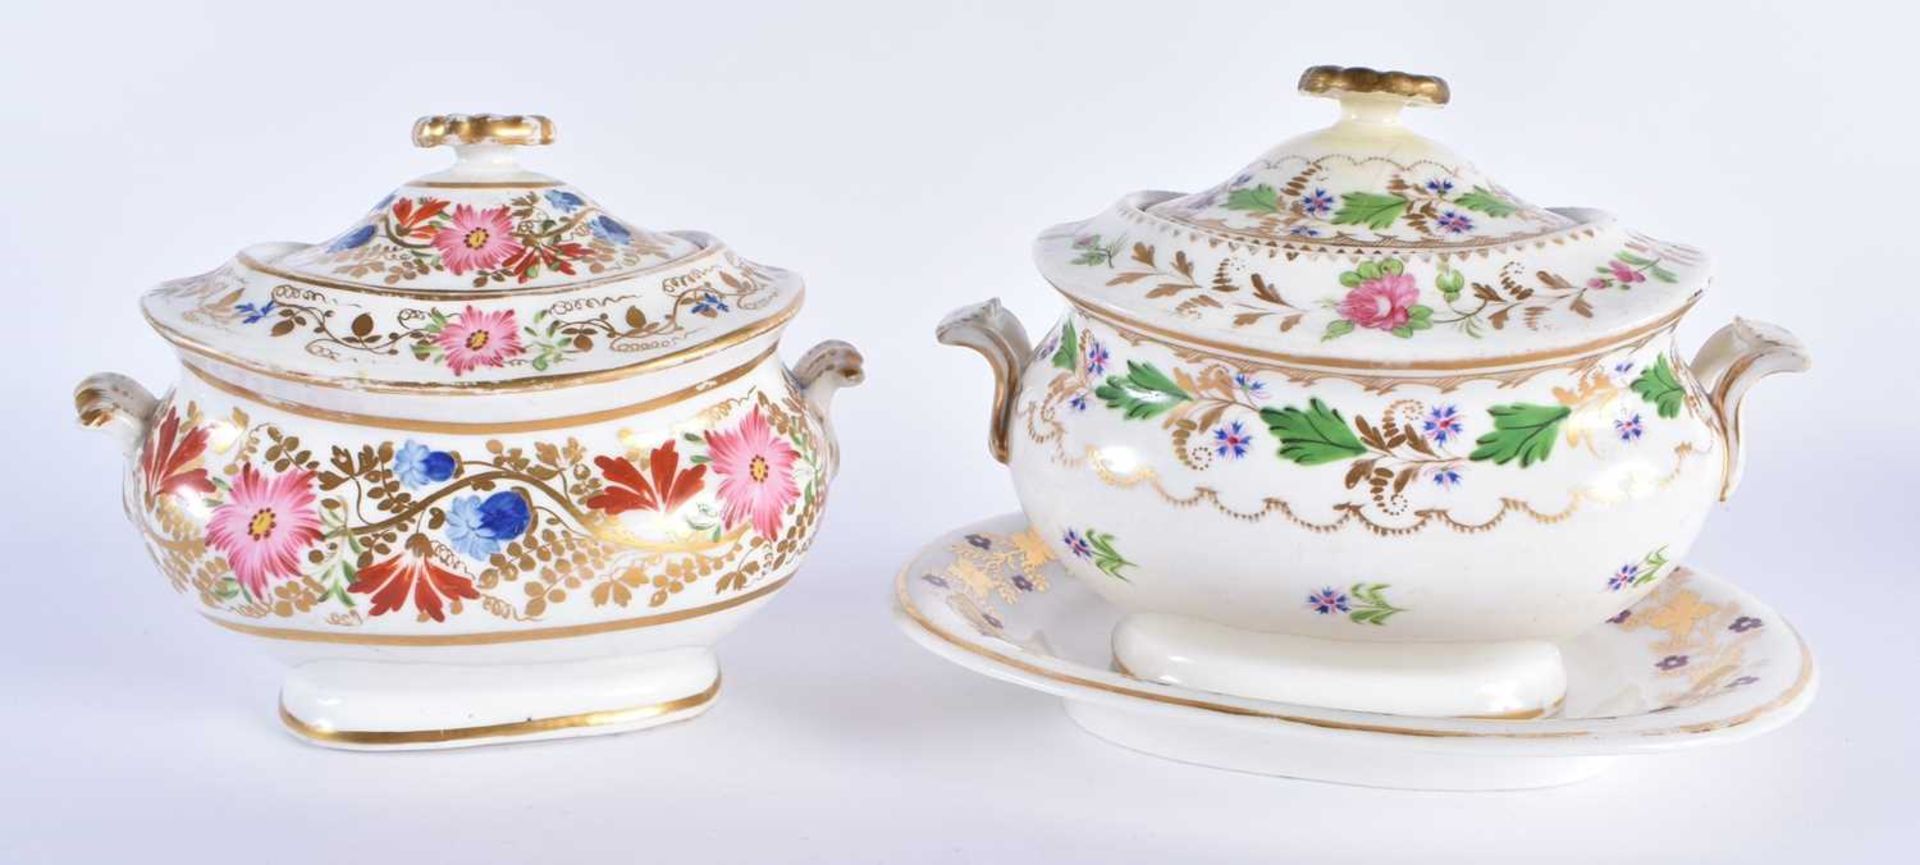 TWO EARLY 19TH CENTURY COALPORT RATHBONE TEAPOTS AND COVERS together with sugar bowls with stand and - Image 5 of 11